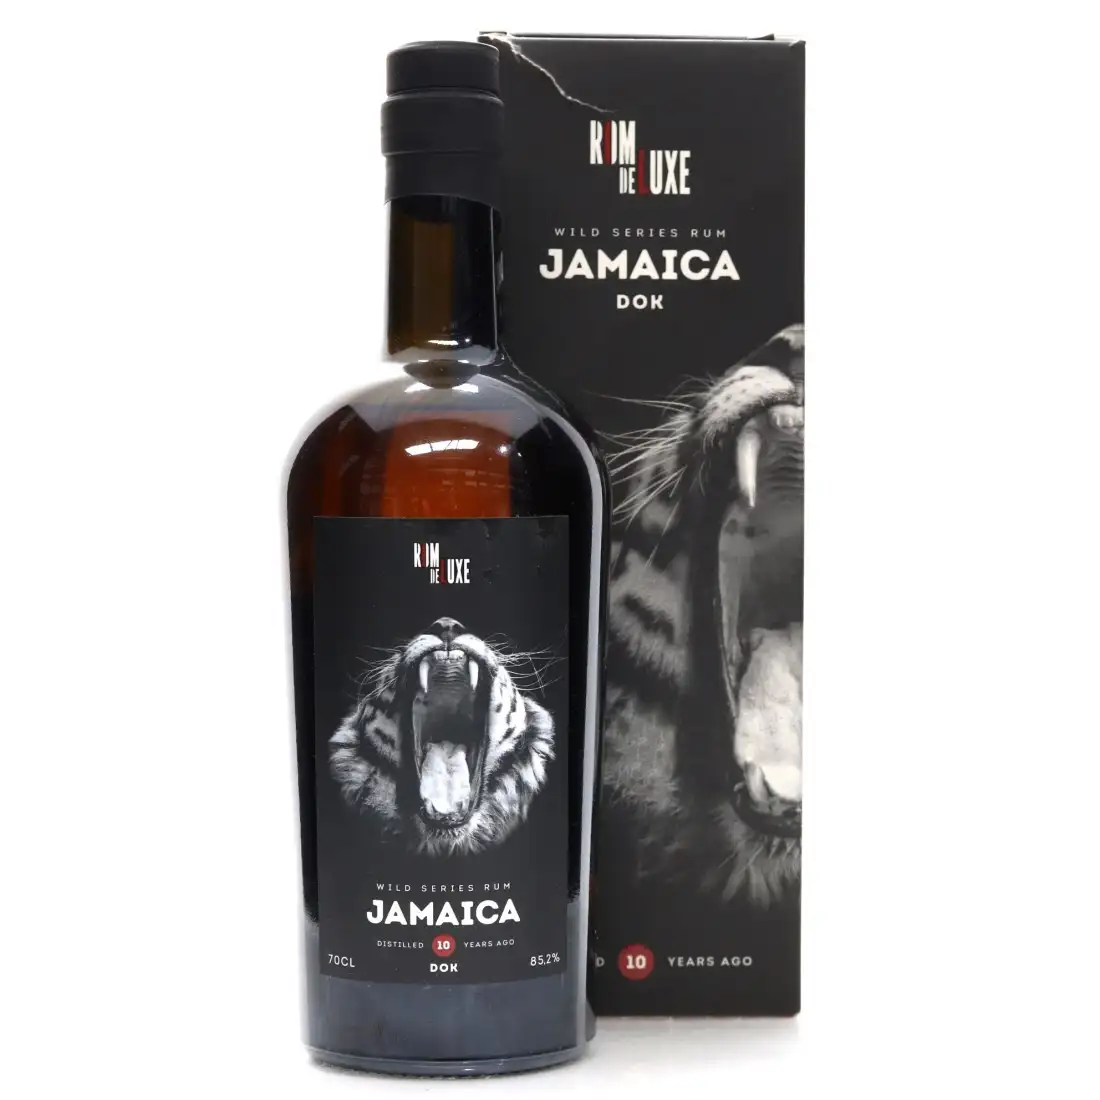 Image of the front of the bottle of the rum Wild Series Rum Jamaica No. 1 DOK